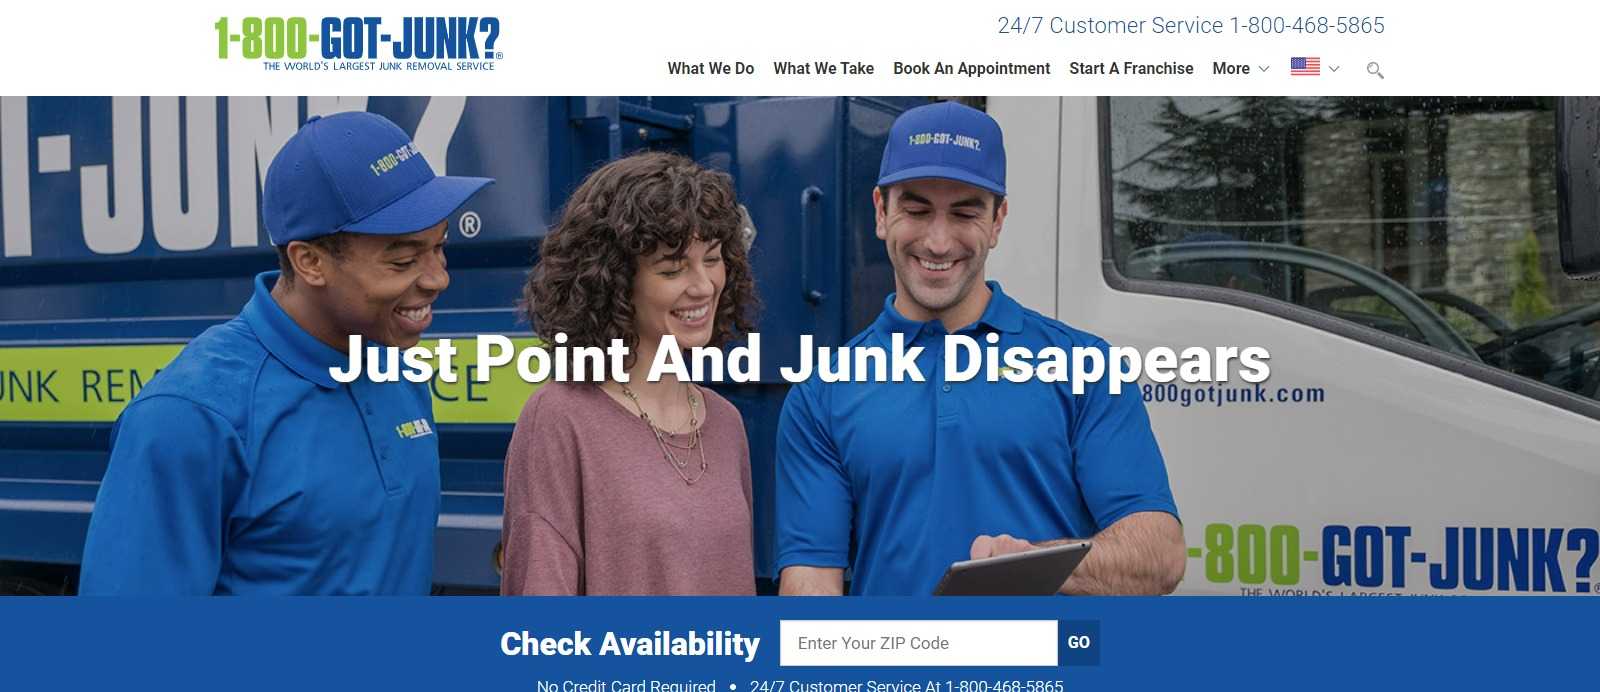 1-800-GOT-JUNK Affiliate Program Review: 2% Commission on Each job Completed